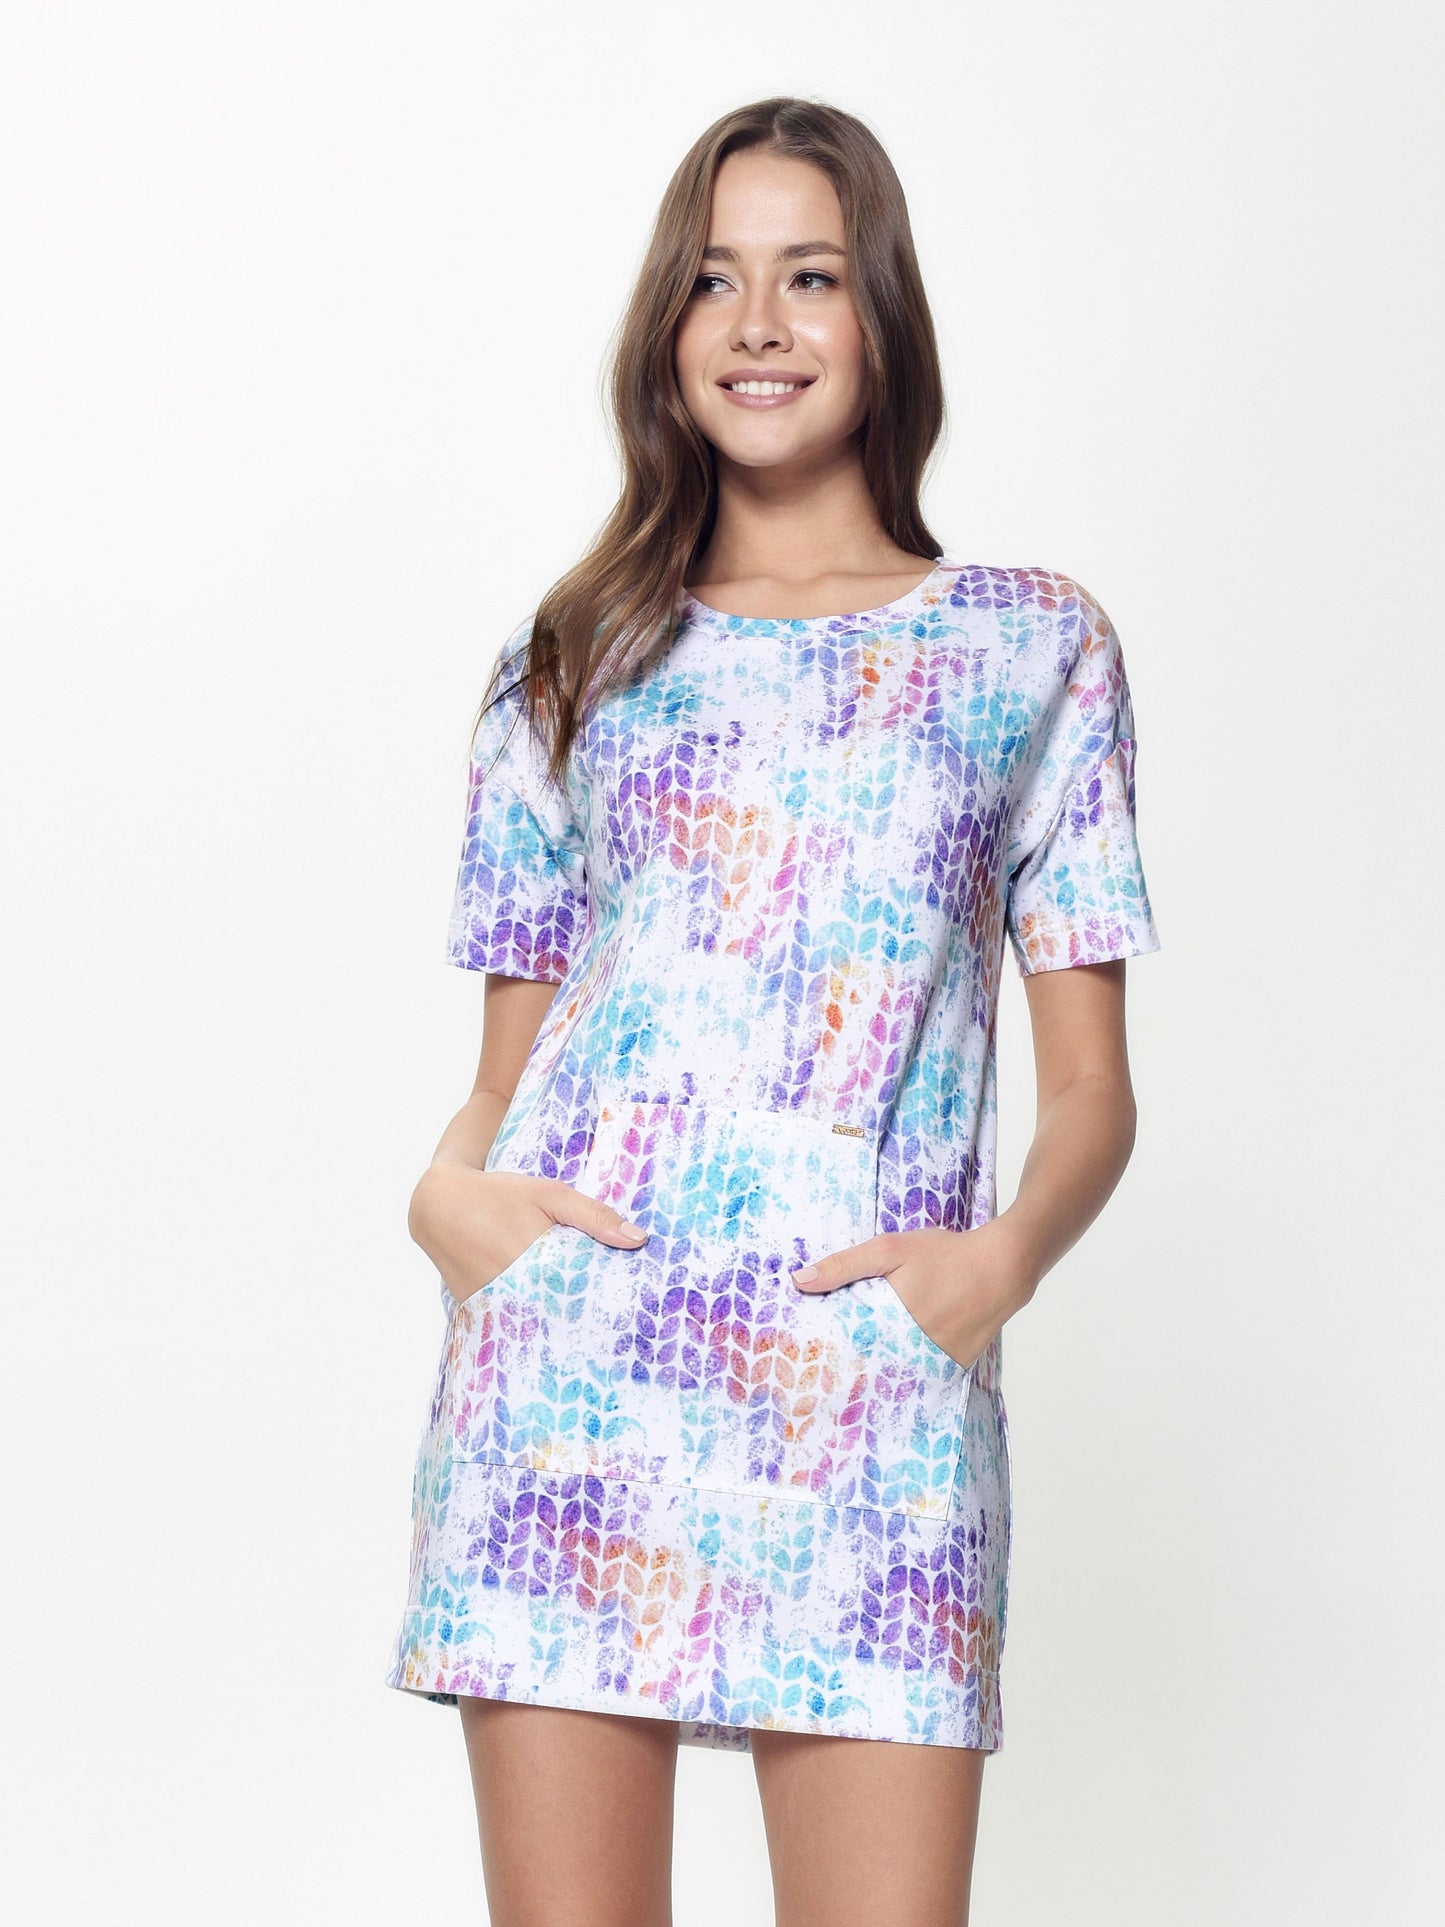 Conte Cotton Dress-Tunic for Girls with Pastel Water Color Print #18C-648TСP (LTH 897)